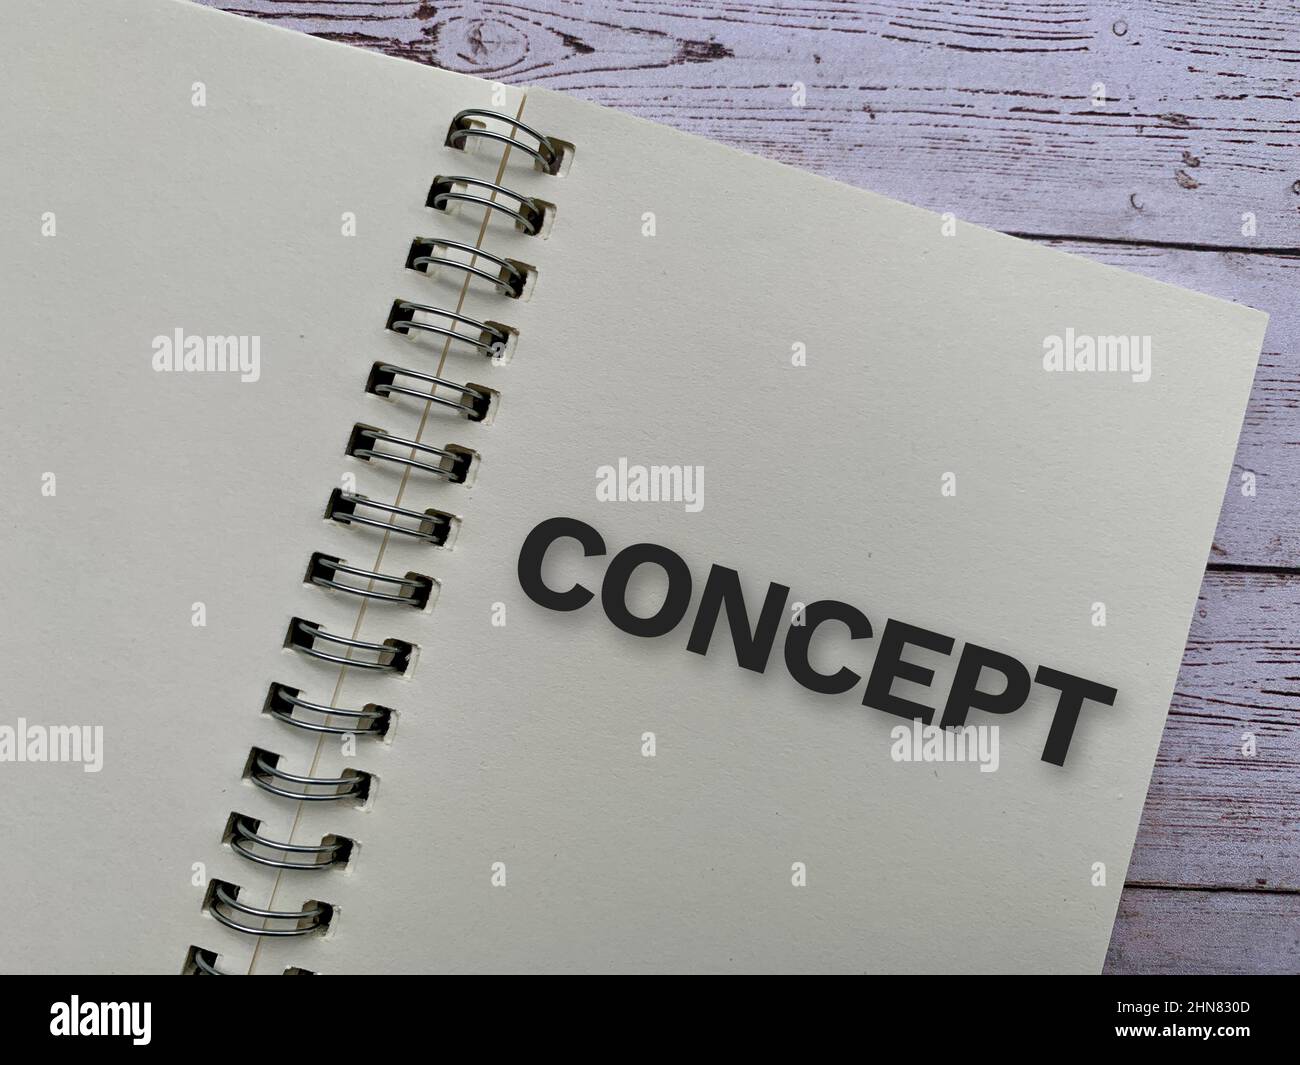 Top view of text on notepad - Concept with wooden desk background. Business concept. Stock Photo